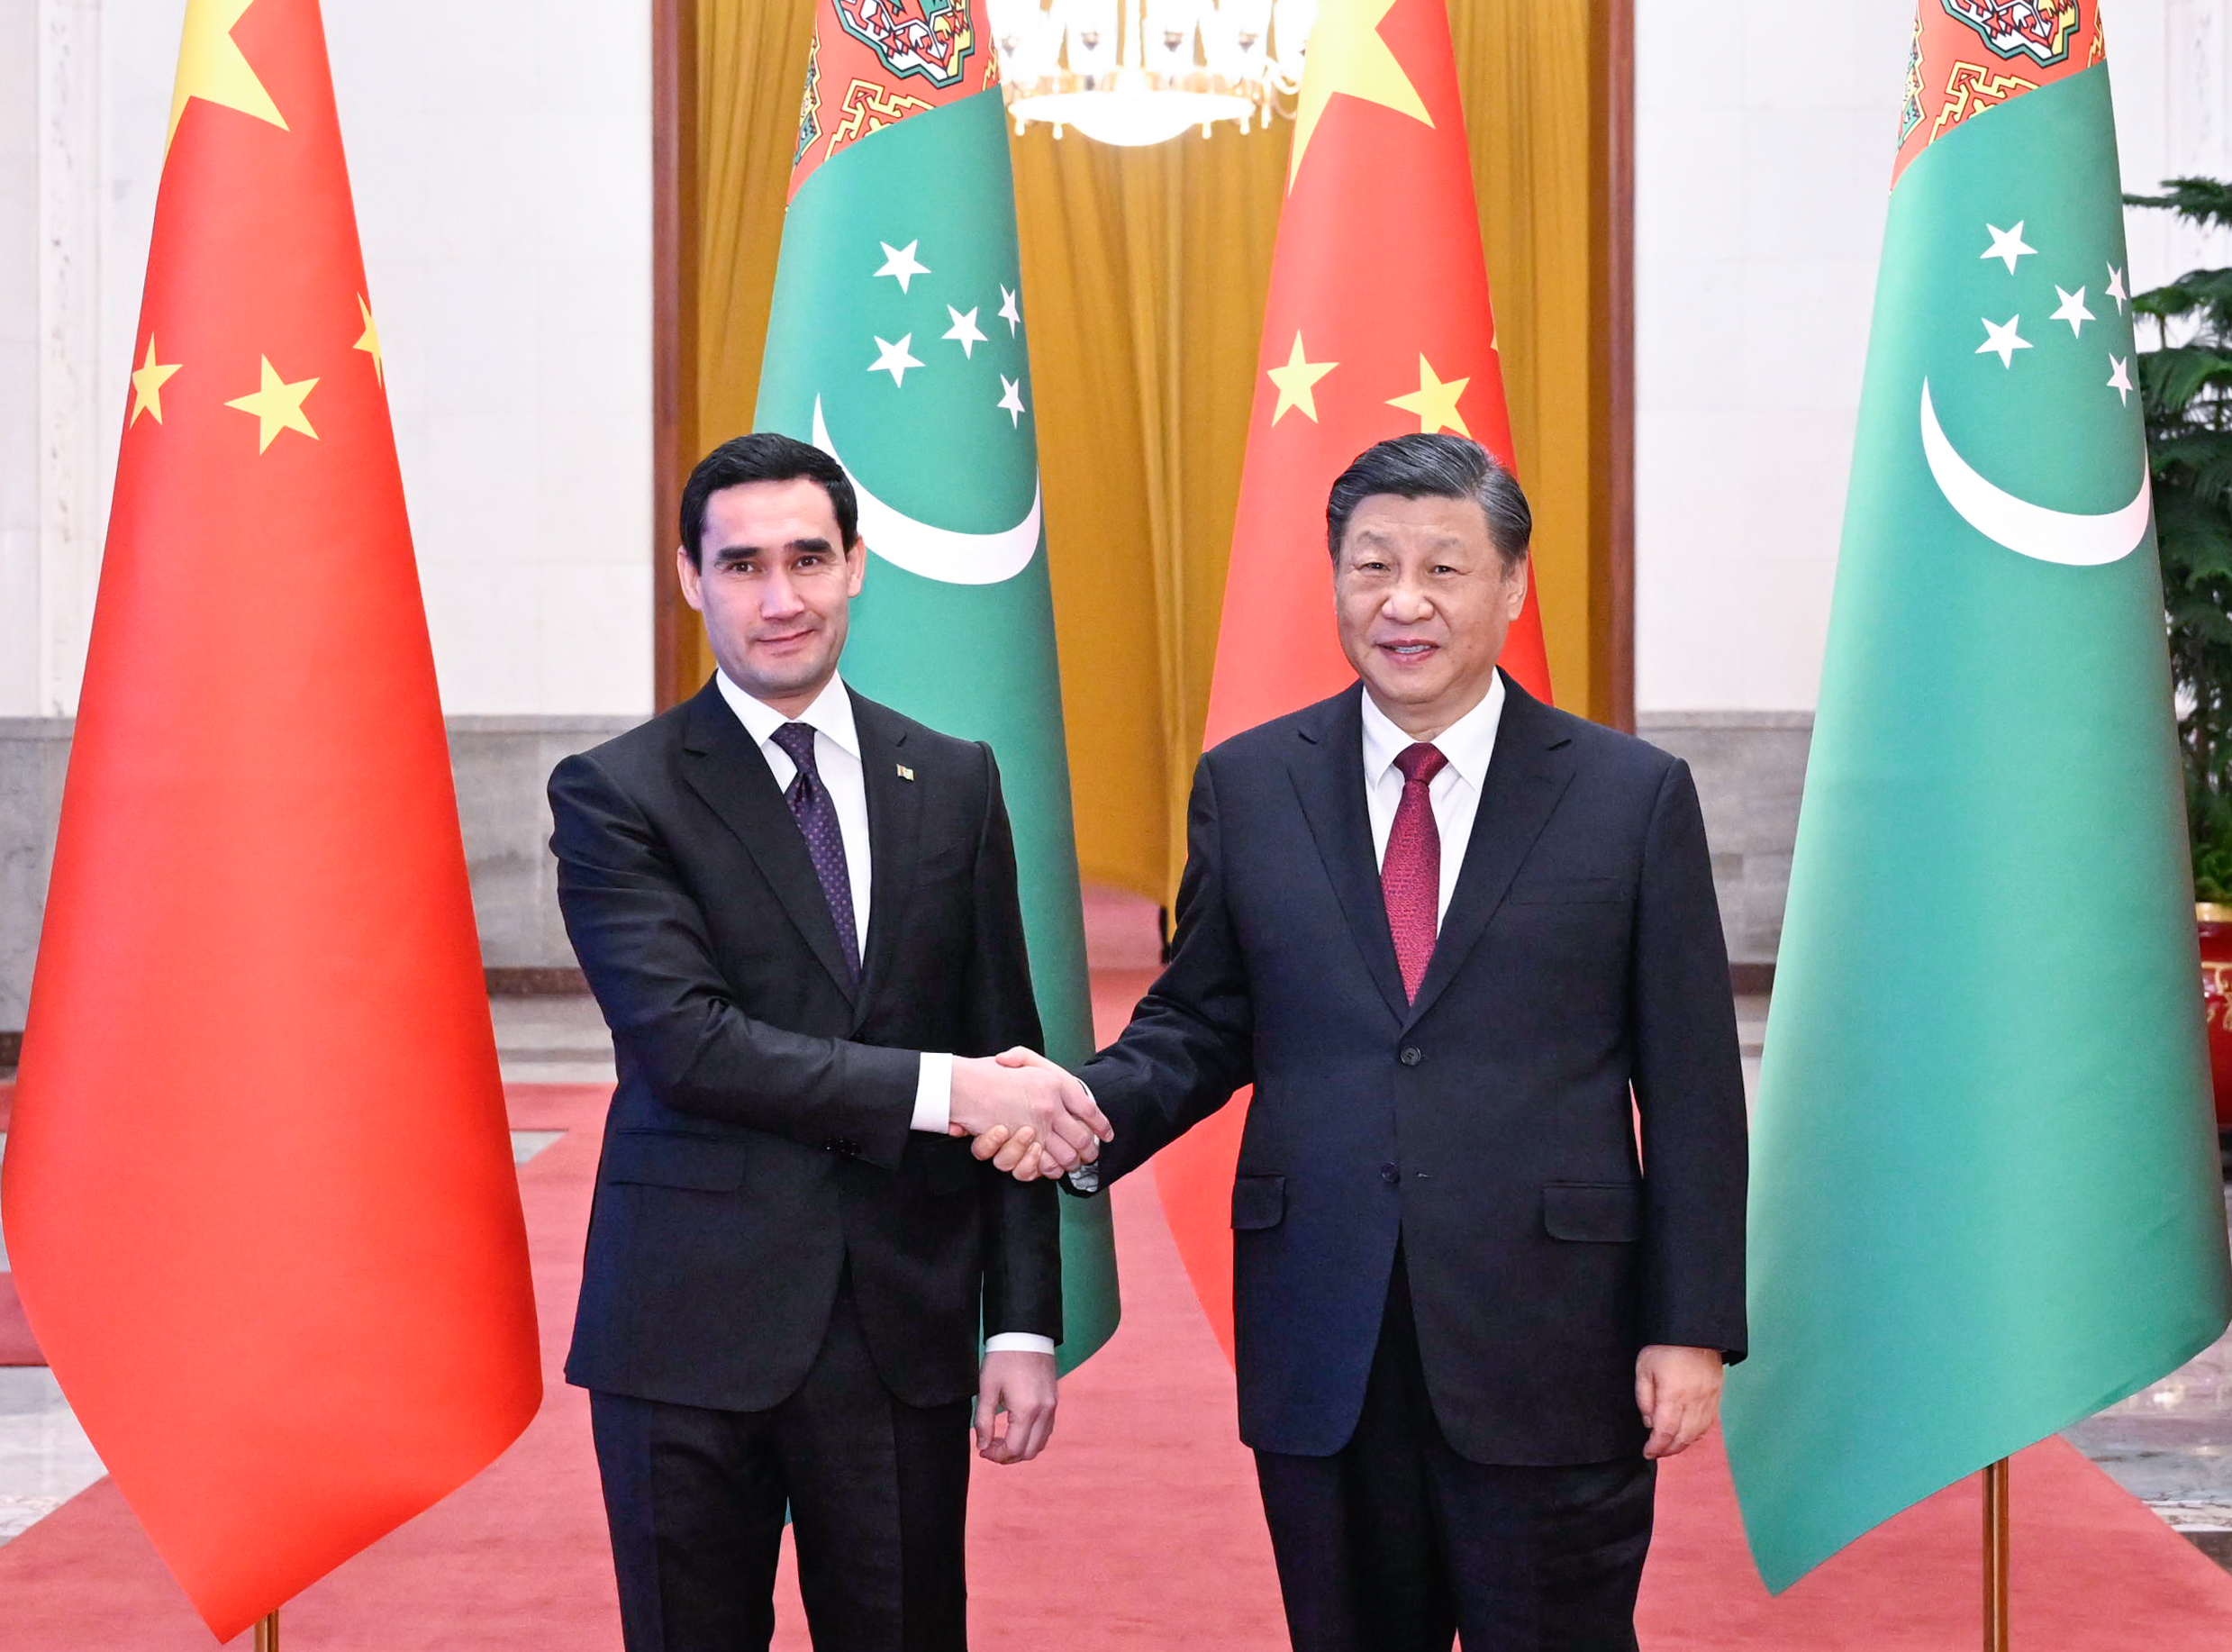 Chinese President Xi Jinping holds a welcoming ceremony for visiting Turkmen President Serdar Berdimuhamedov prior to their talks at the Great Hall of the People in Beijing, capital of China, on January 6, 2023. Photo: Xinhua